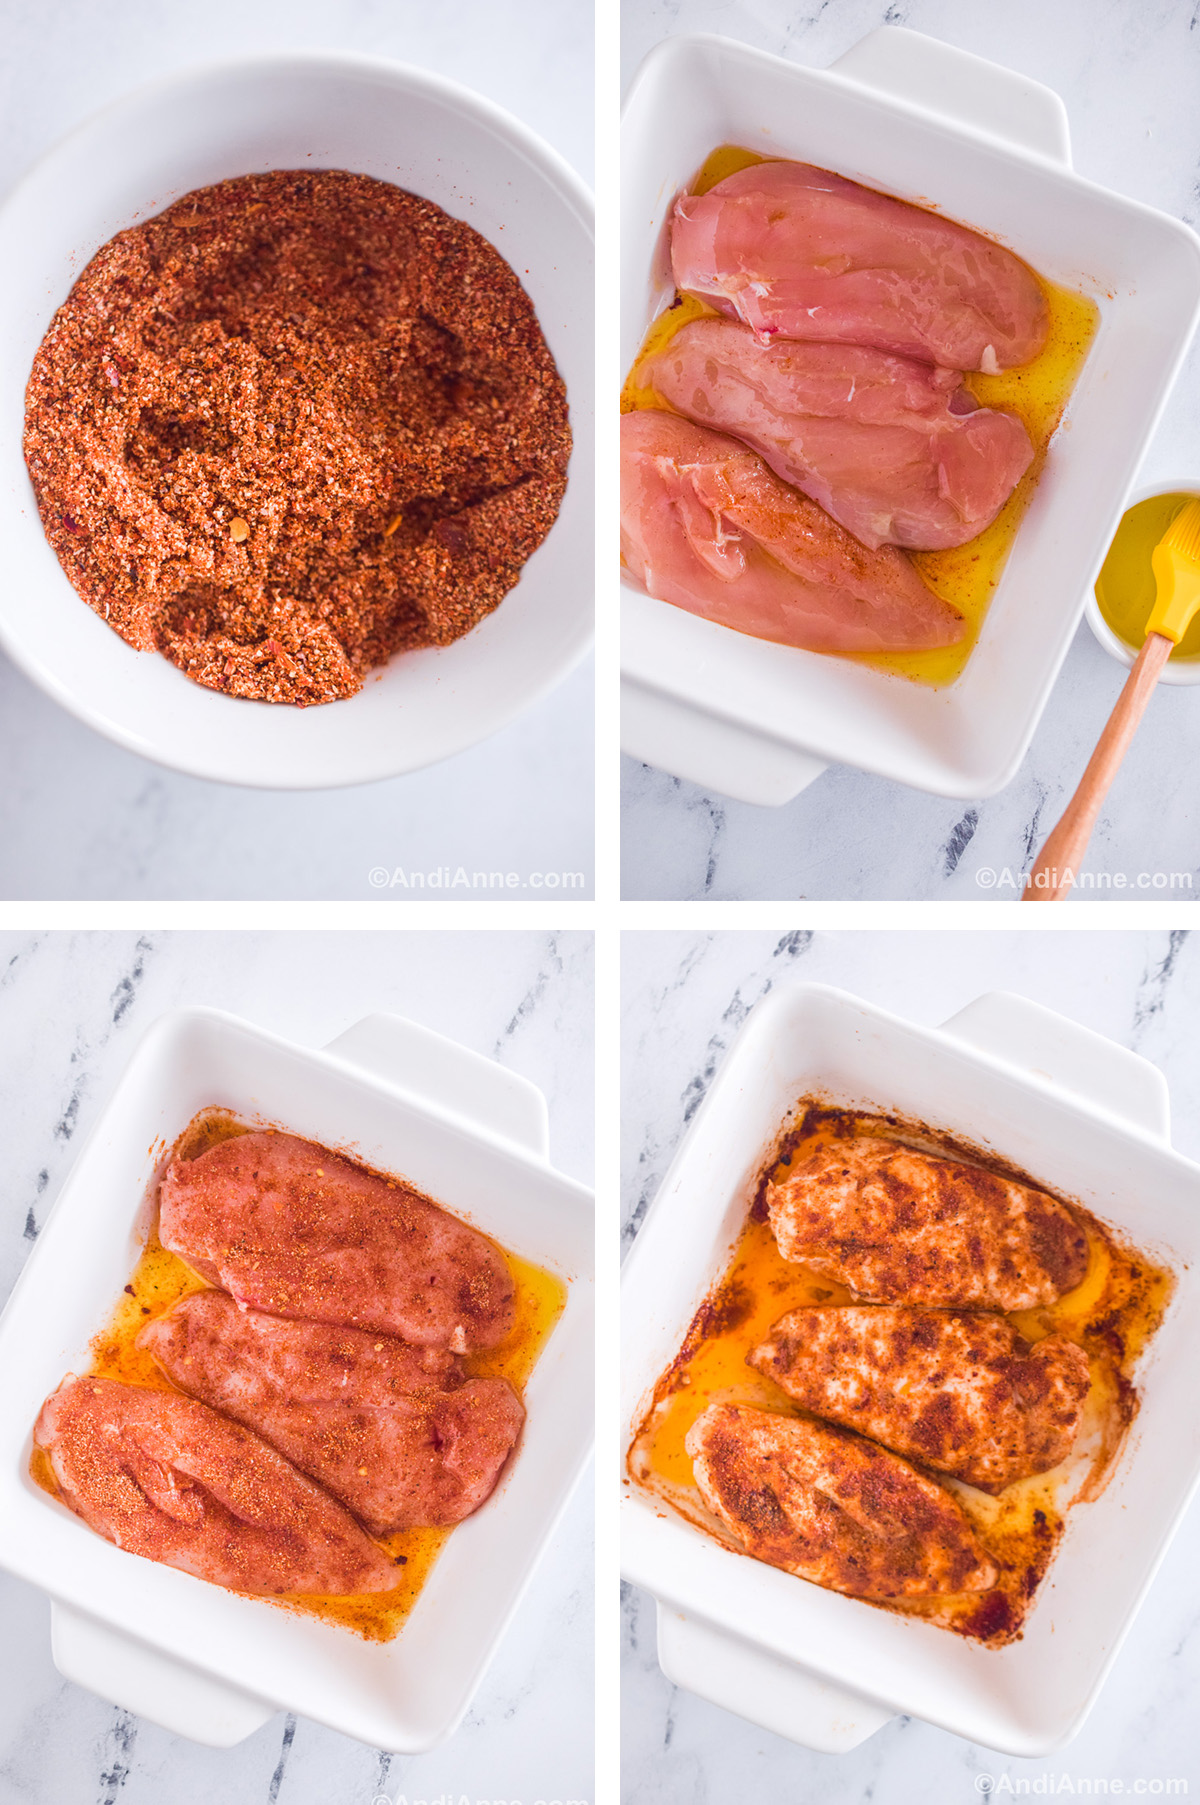 Four images showing steps to make the recipe. First is a bowl of spices. Second is a white baking dish with 3 raw chicken breasts and olive oil. Third is taco seasoning sprinkled on top. Fourth is baked chicken breasts in the white dish.